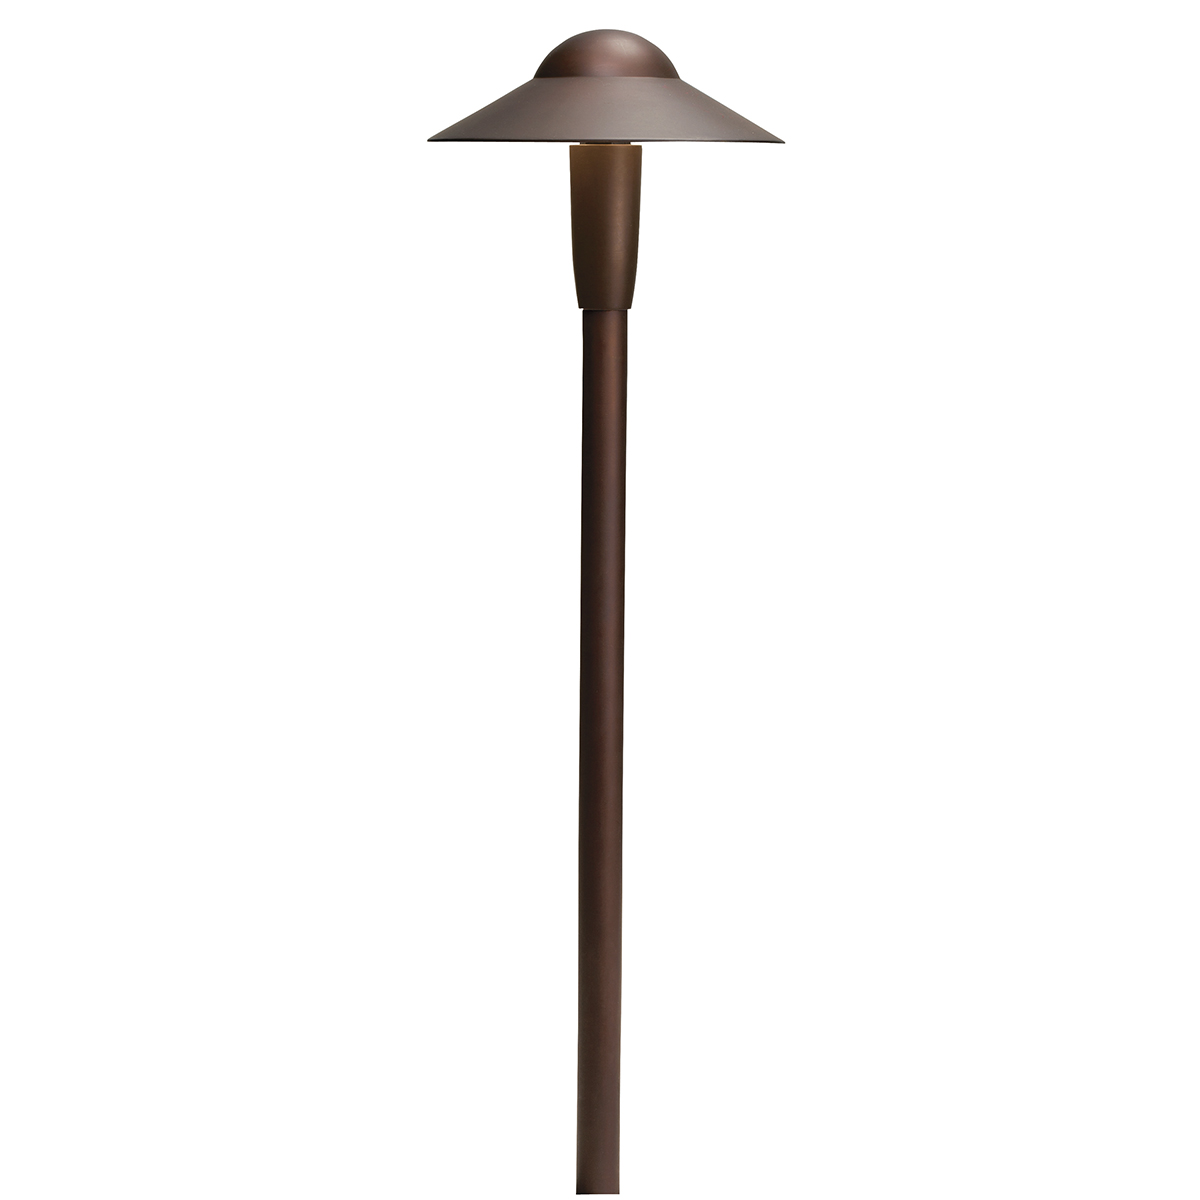 Kichler 15870AZT27R LED 6 Dome Path Light in Textured Architectural Bronze